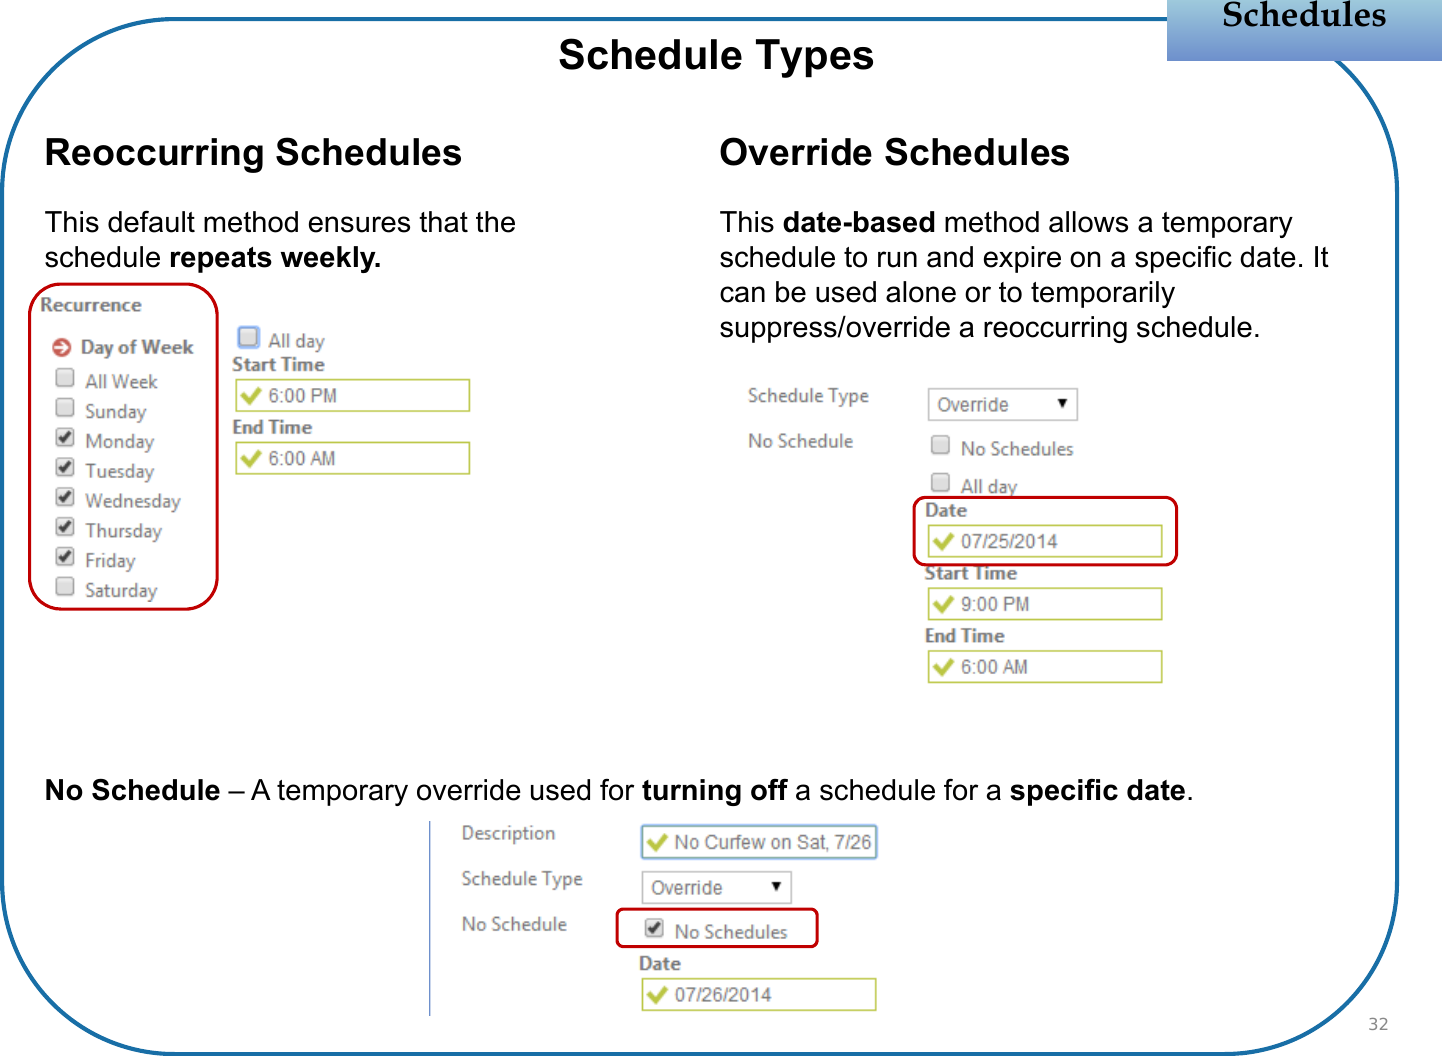 Schedule Types SchedulesSchedules32Reoccurring Schedules  Override Schedules This default method ensures that the schedule repeats weekly.This date-based method allows a temporary schedule to run and expire on a specific date. It can be used alone or to temporarily suppress/override a reoccurring schedule.No Schedule – A temporary override used for turning off a schedule for a specific date.